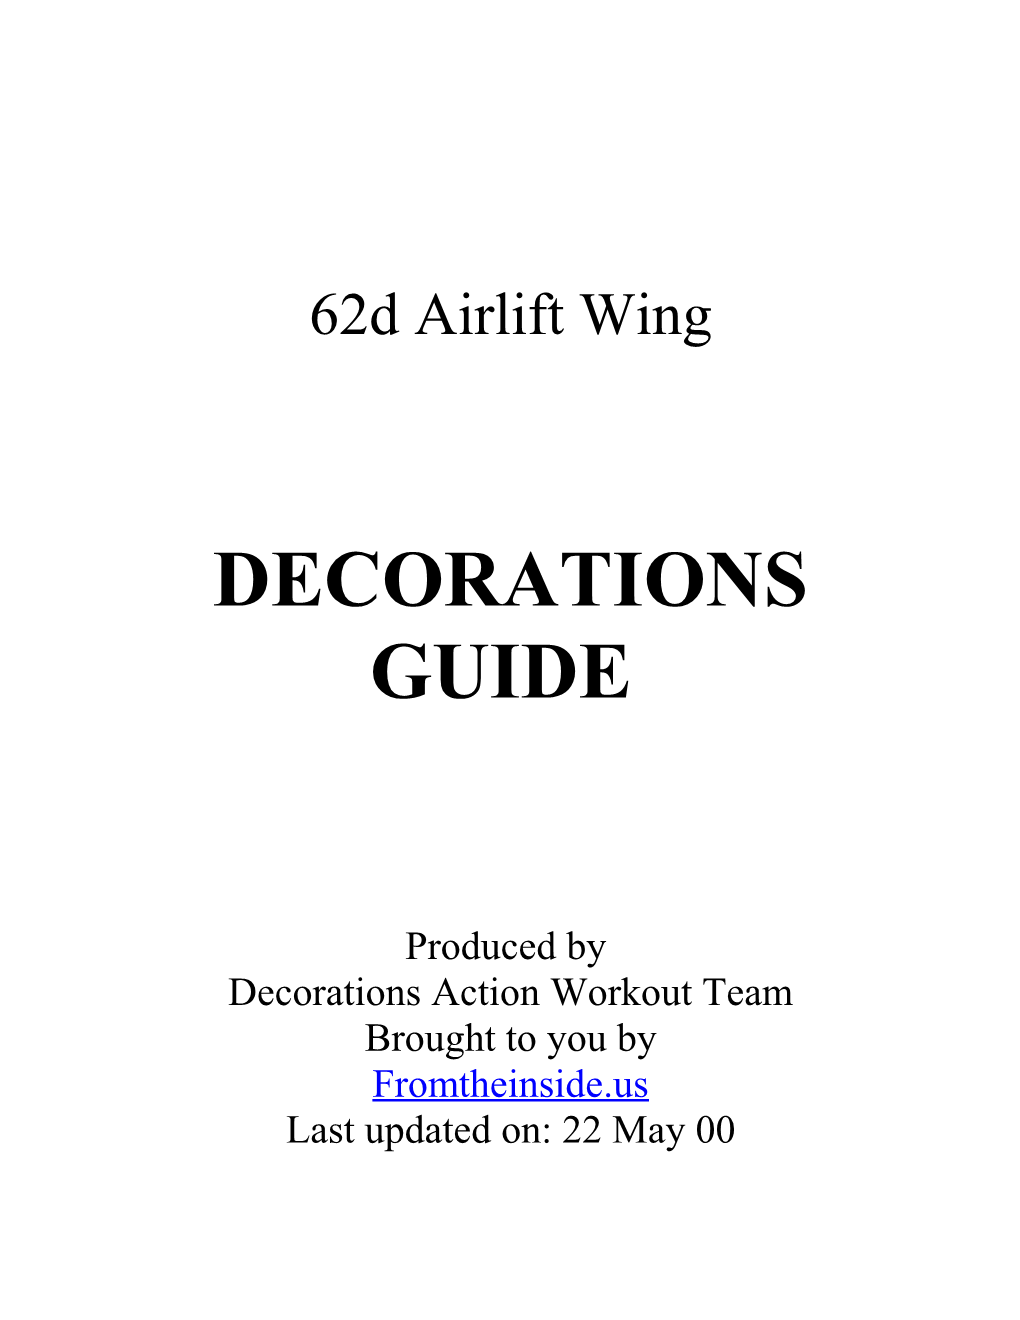 62D Airlift Wing Decorations Guide